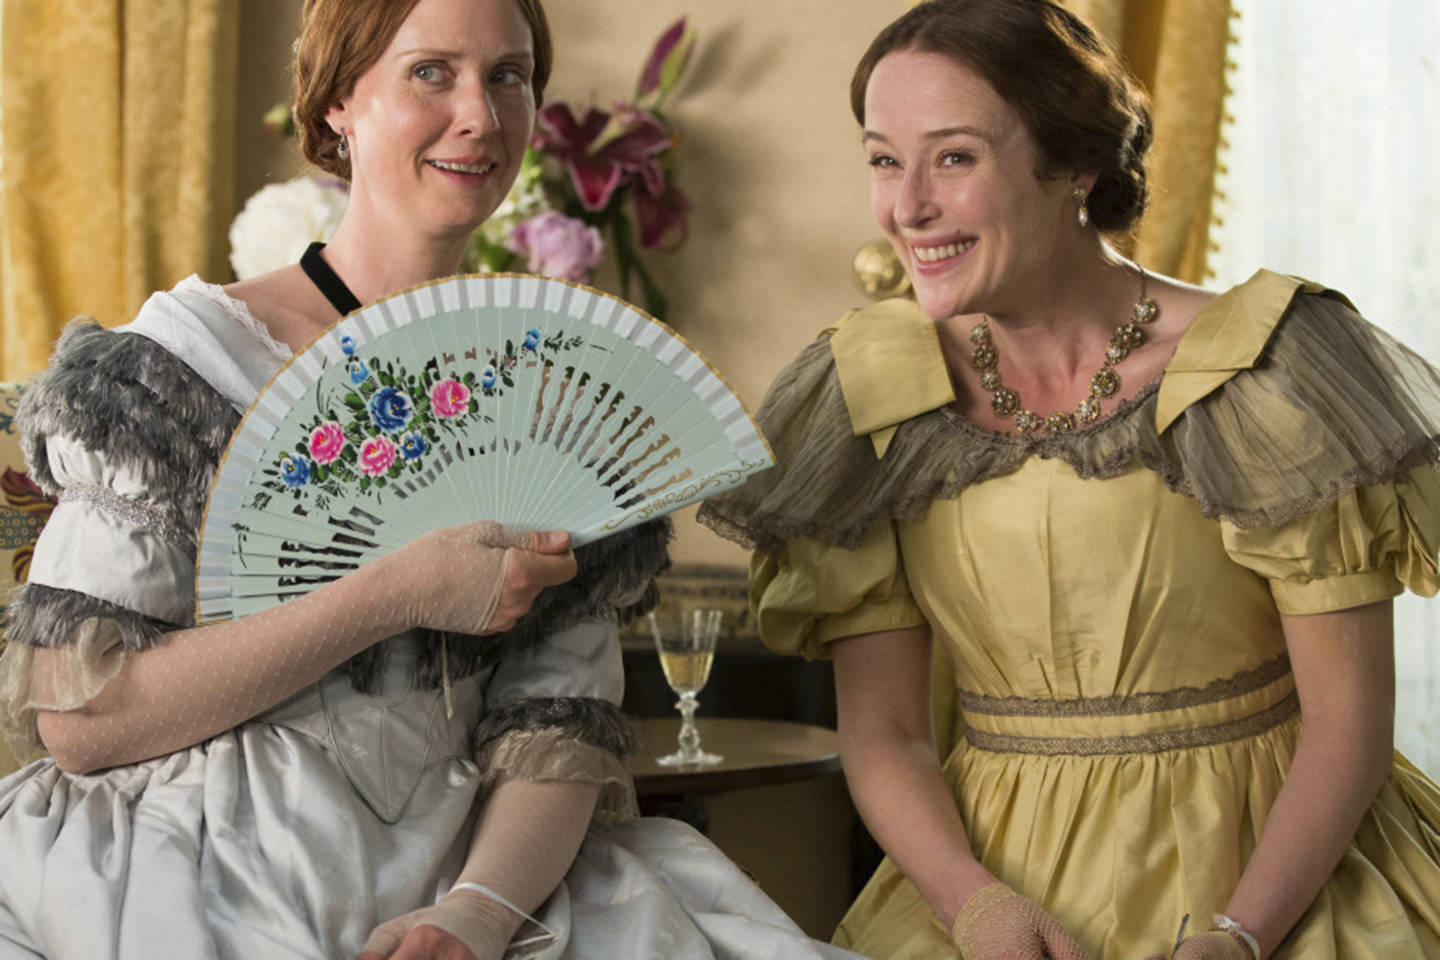 ‘A Quiet Passion’ Is as Enjoyably Eccentric as Emily Dickinson’s Poetry